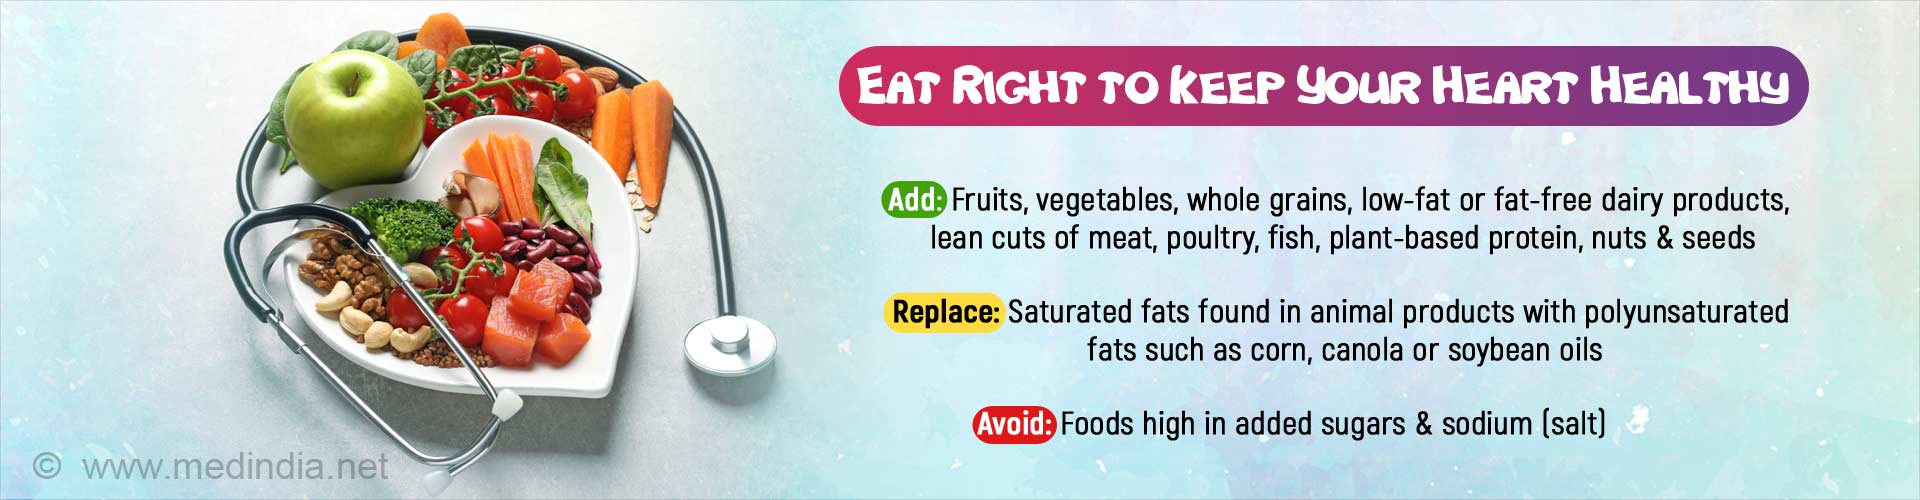 Eat right to keep your heart healthy. Add: Fruits, vegetables, whole grains, low-fat or fat-free dairy products, lean cuts of meat, poultry, fish, plant-based protein, nuts and seeds. Replace: Saturated fats found in animal products with polyunsaturated fats such as corn, canola or soybean oils. Avoid: Foods high in added sugars and sodium (salt).